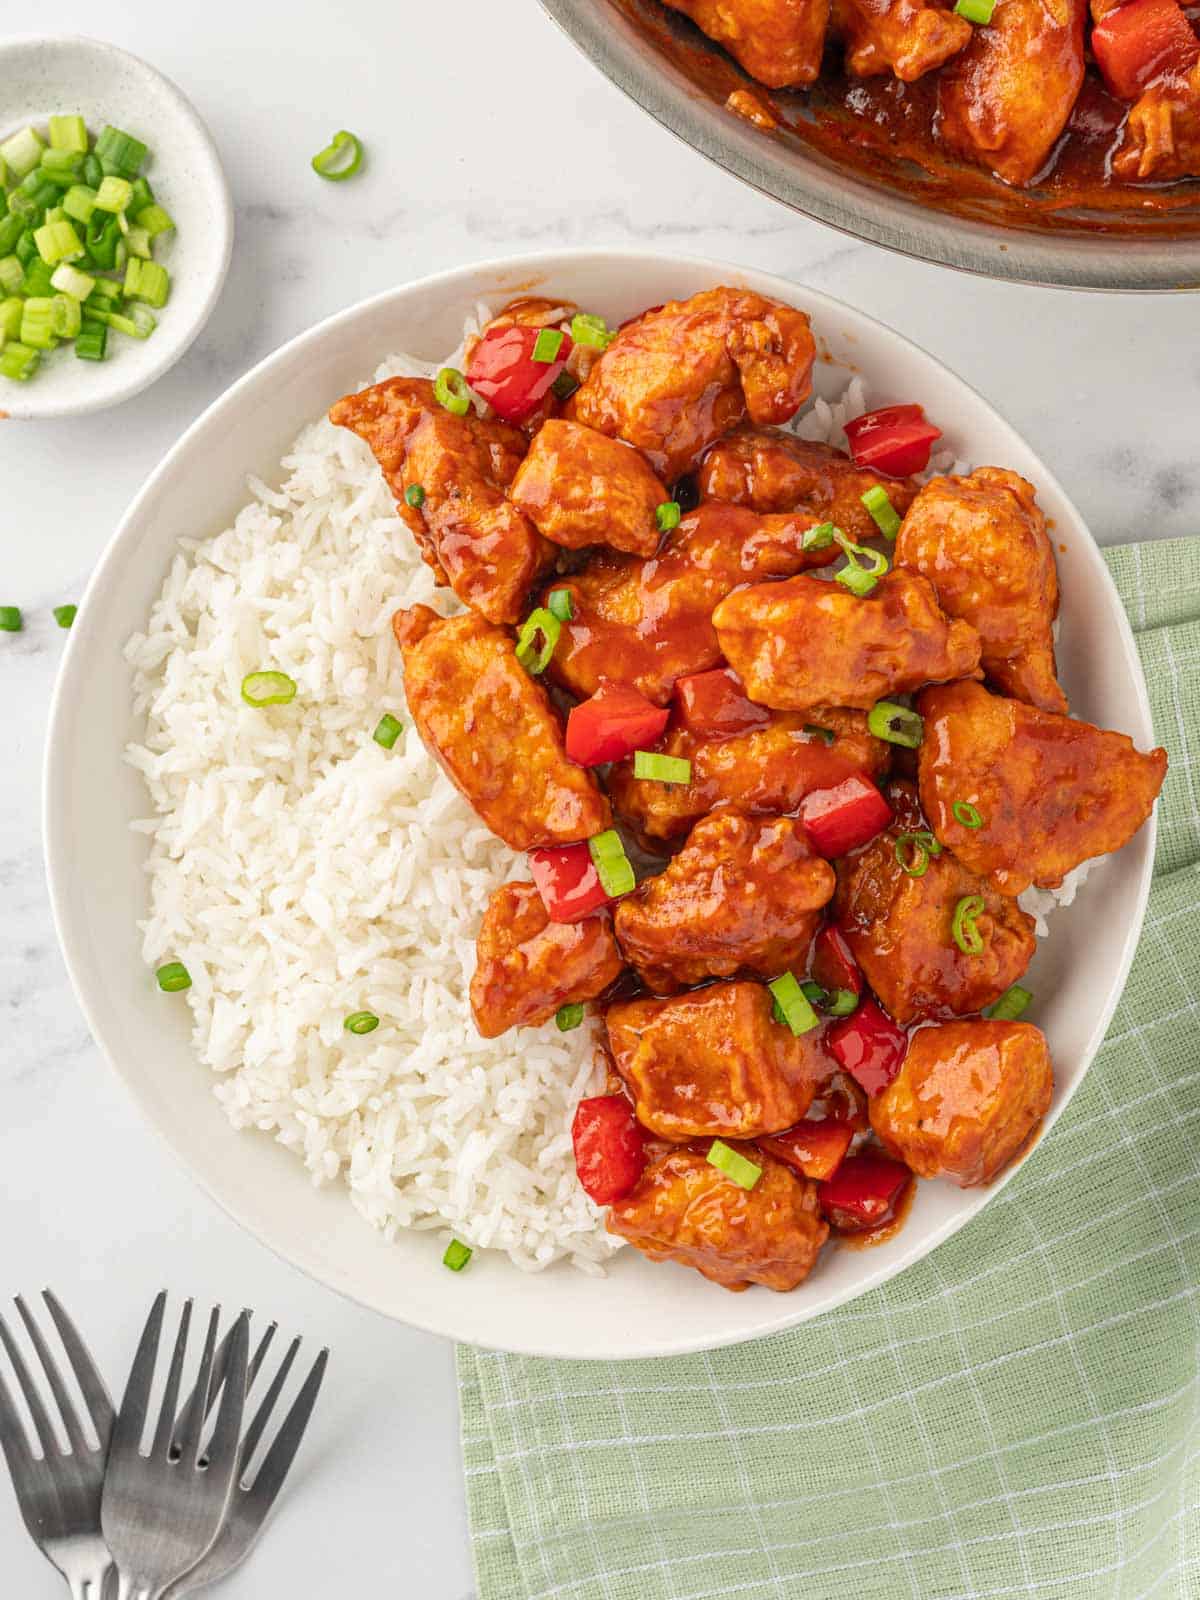 Manchurian chicken in a bowl with rice.